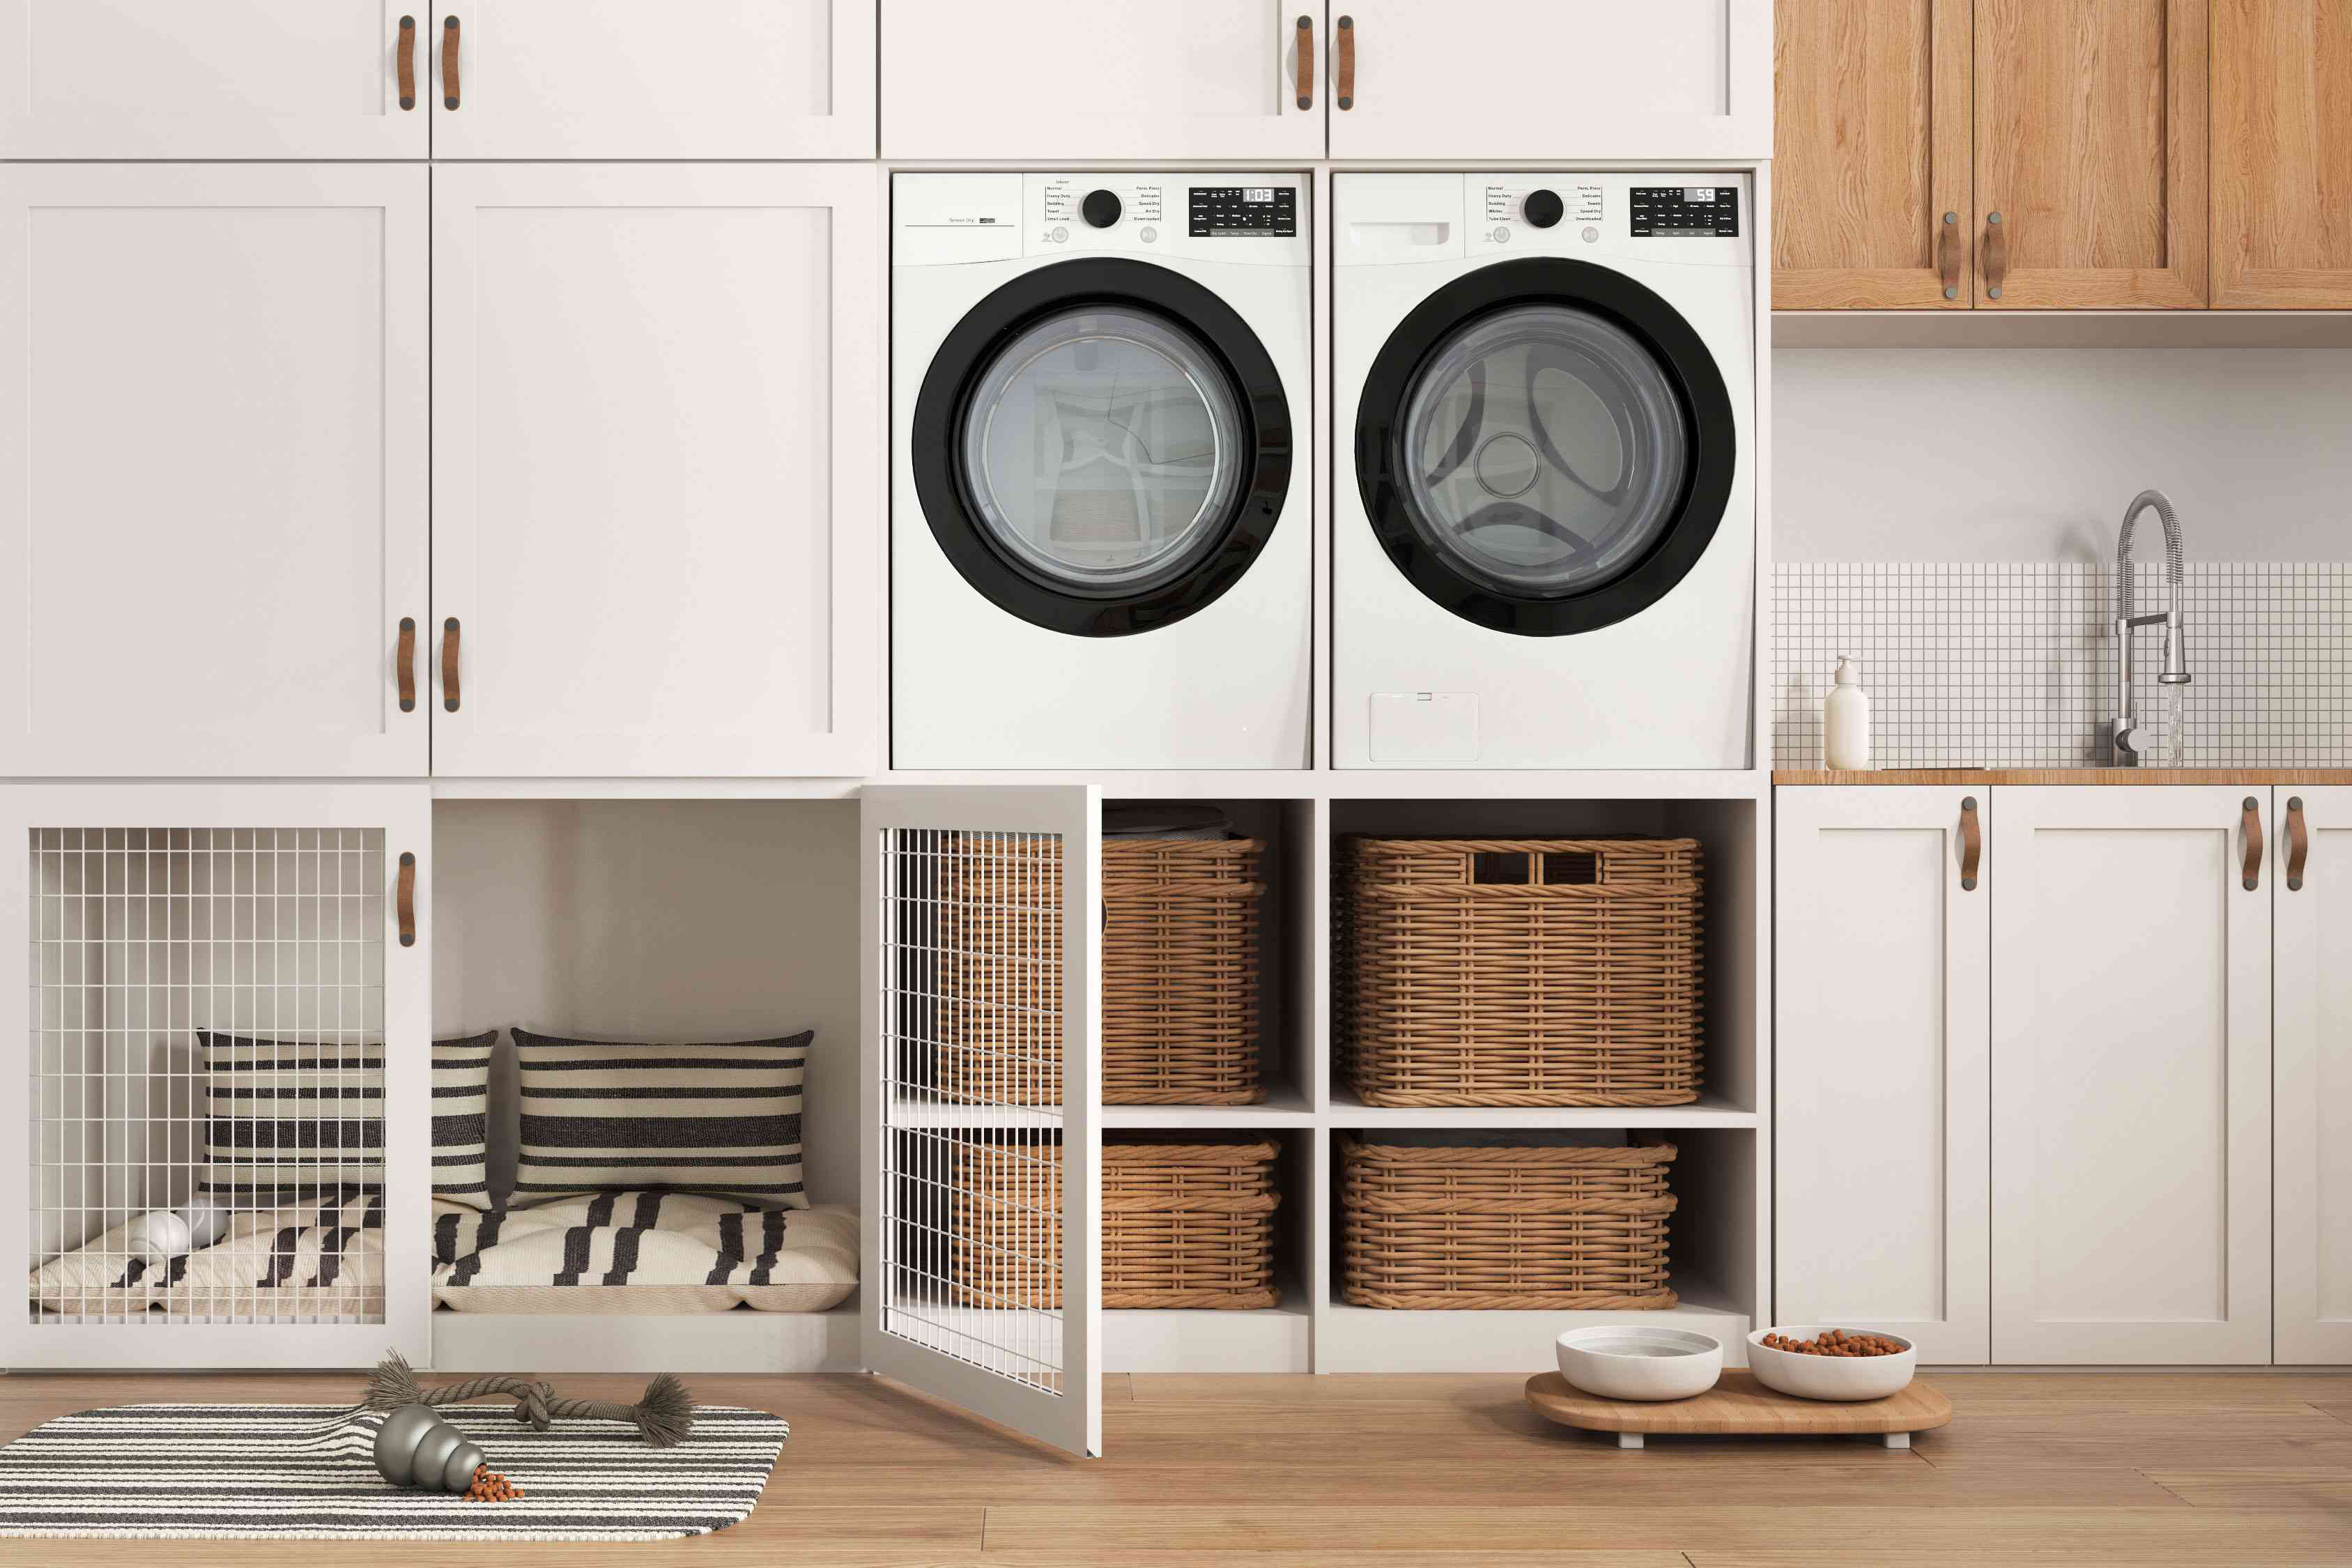 49 Clever Laundry Room Ideas That Will Make This Space a Joy to Work In